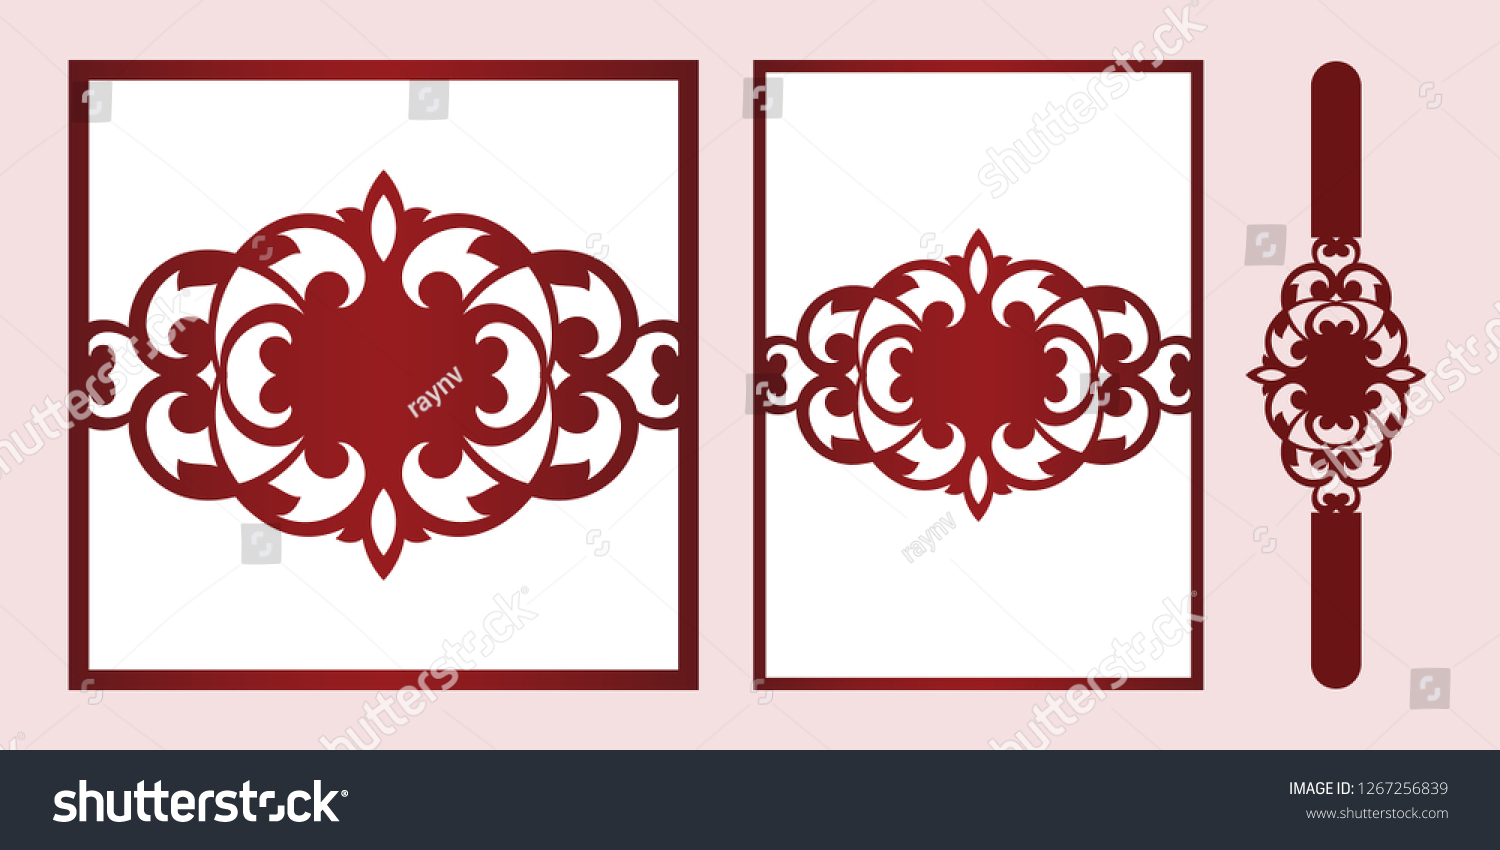 SVG of Laser cut wedding invitation card template vector. Wedding invitation or greeting card with Belly Band. Open card. Suitable for greeting cards, invitations, menus. svg